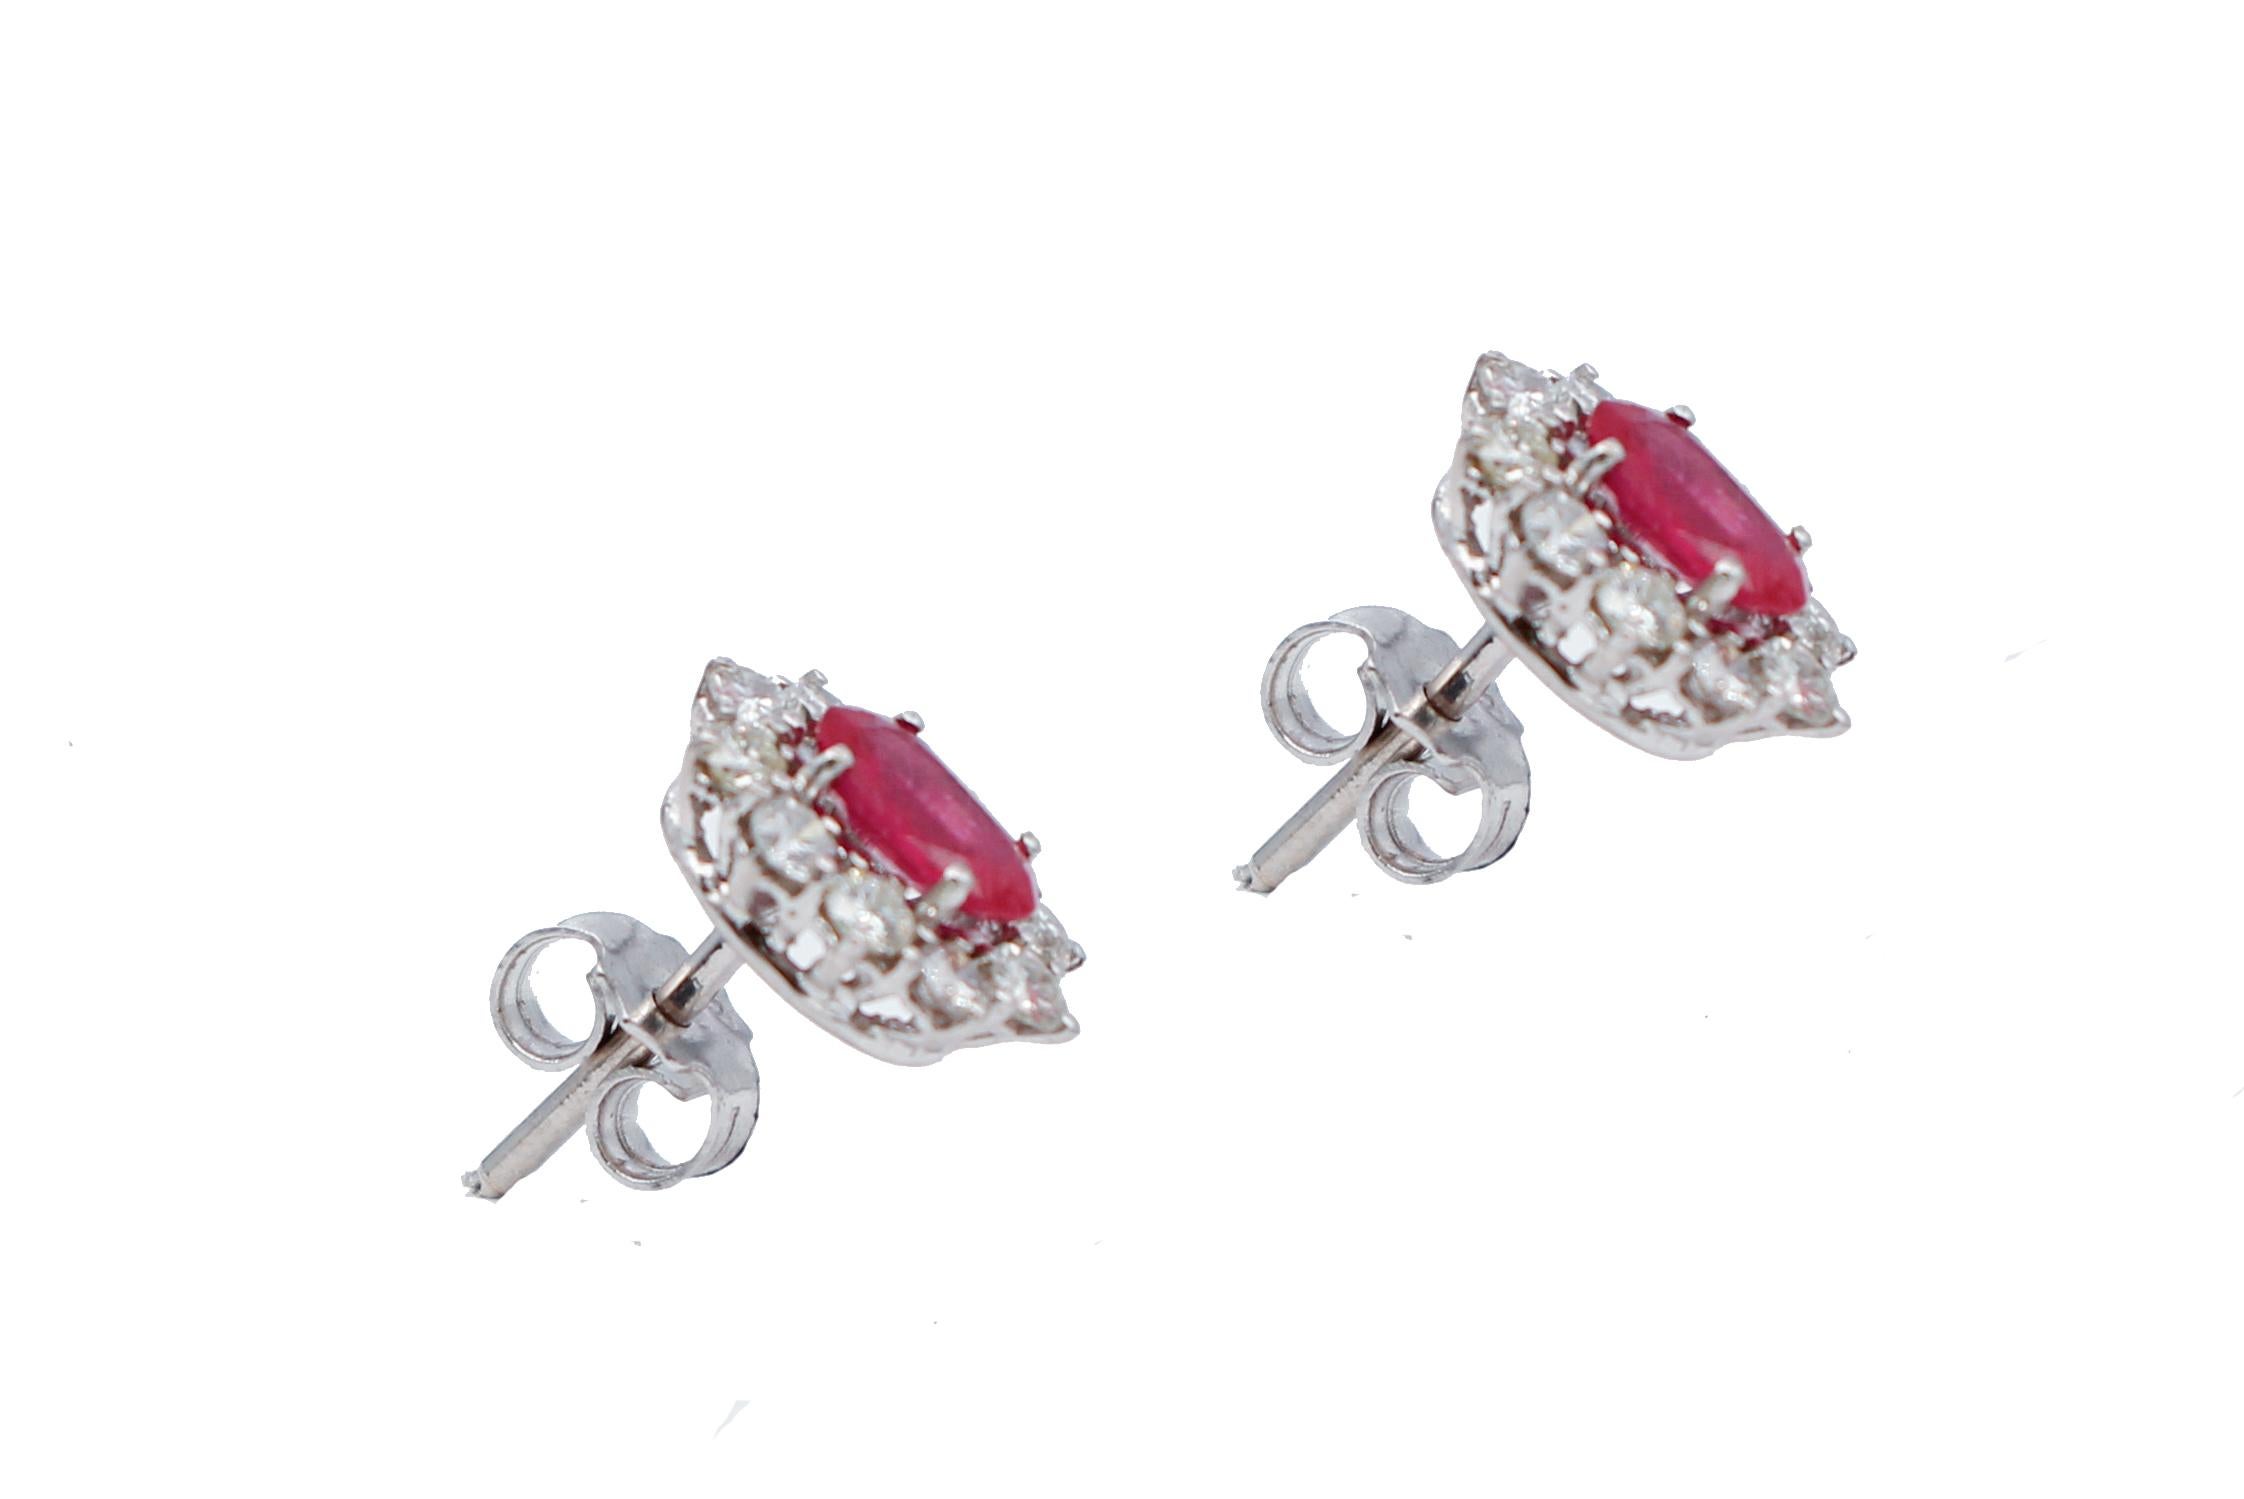 SHIPPING POLICY: 
No additional costs will be added to this order.
Shipping costs will be totally covered by the seller (customs duties included). 


For any inquiries,please contact the seller through the message center.

Gorgeous stud earrings in